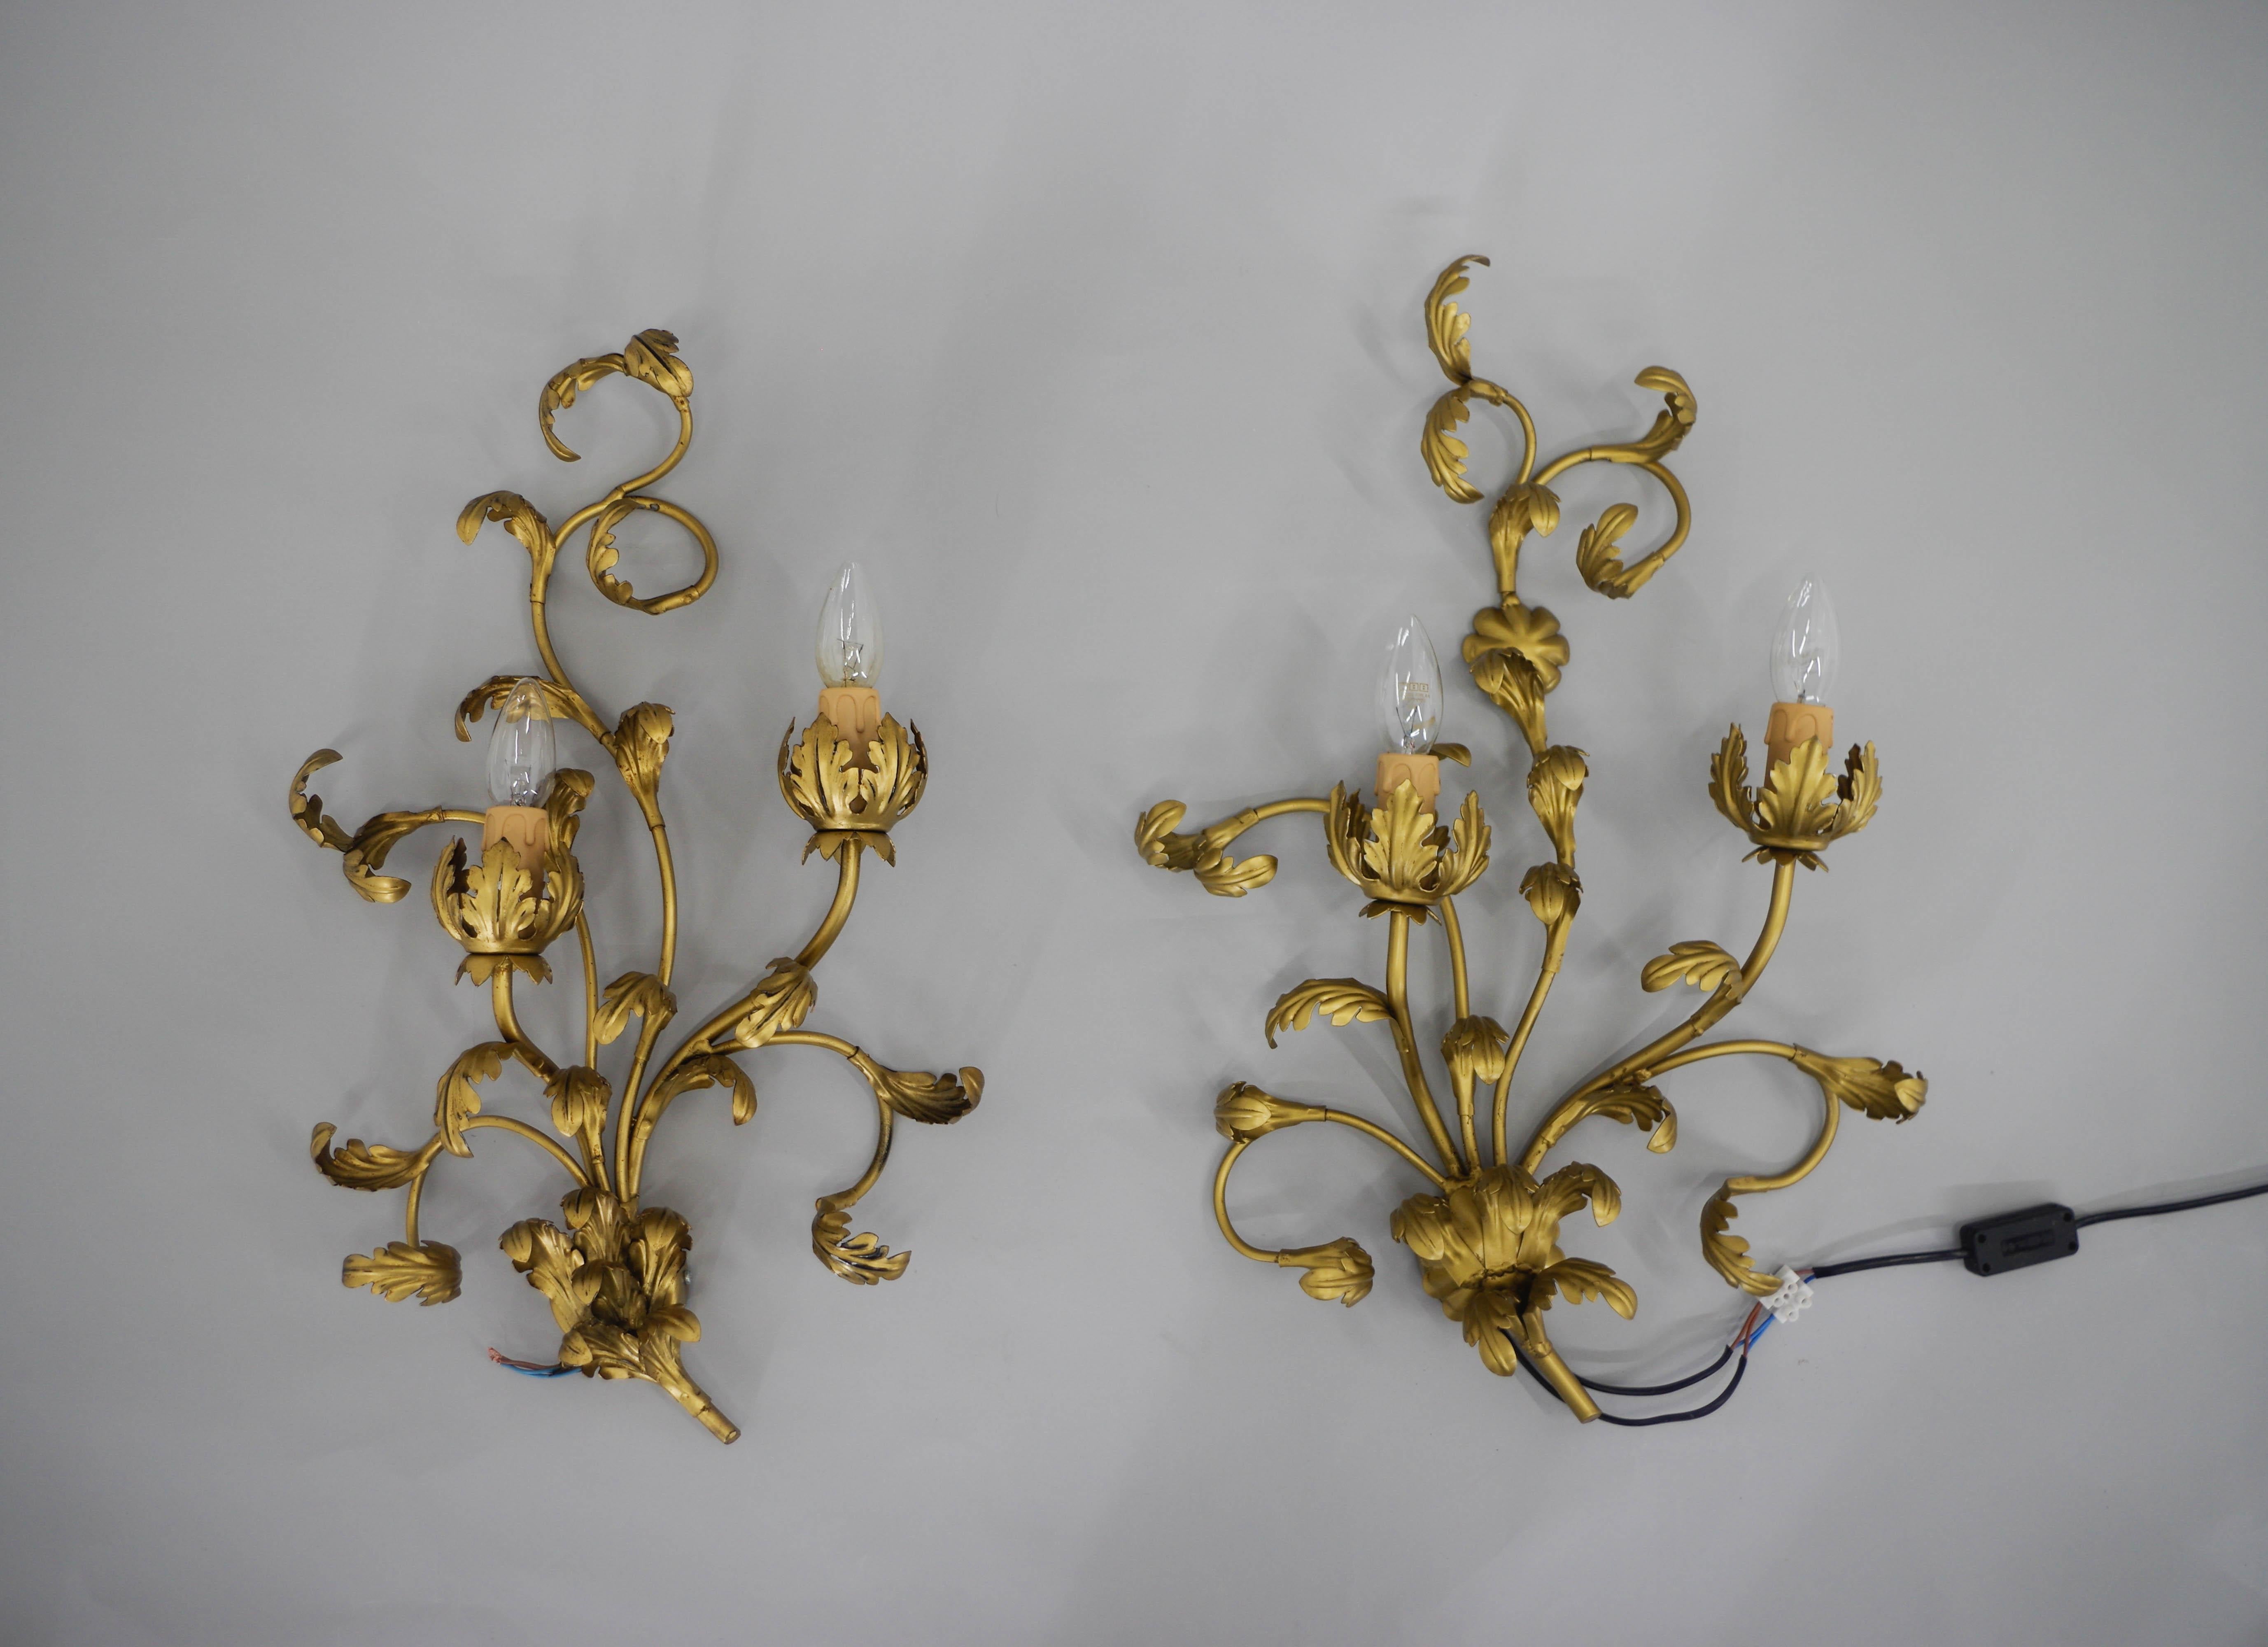 Set of two gilt wall lamps with floral motive.
Made in Italy circa 1960s.
Cleaned.
Each lamp has two E12-E14 sockets
US wiring compatible